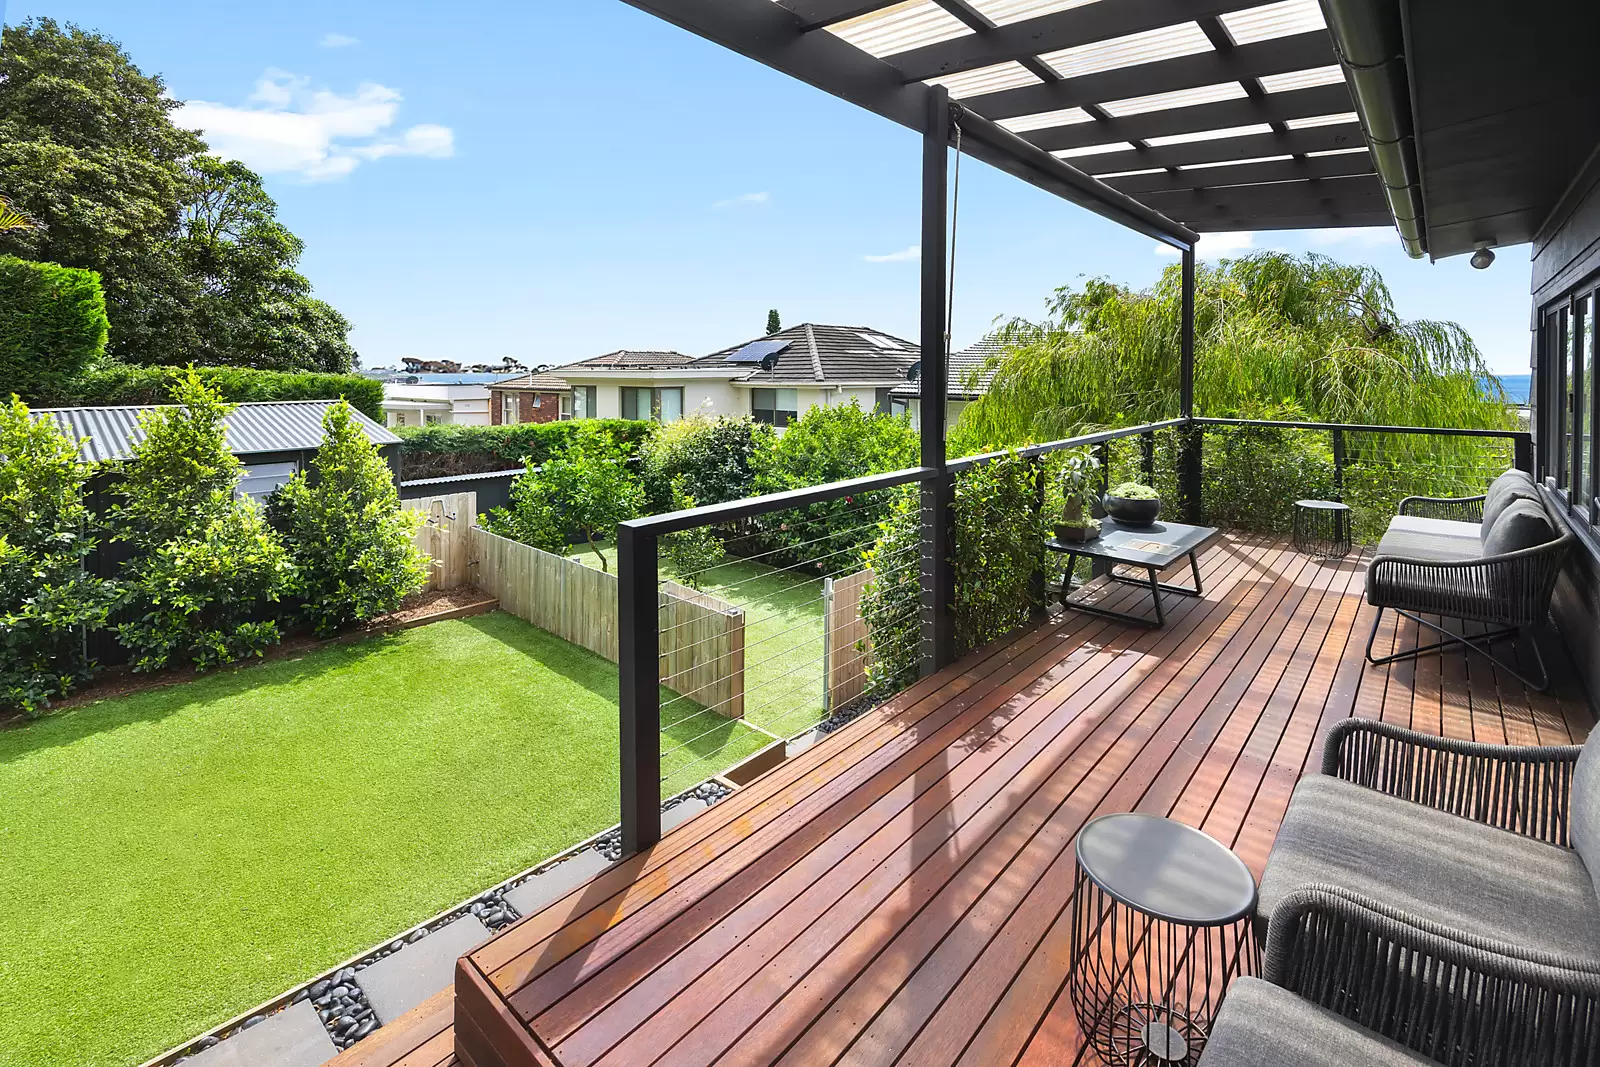 Photo #8: 4 Pearce Street, South Coogee - Auction by Sydney Sotheby's International Realty